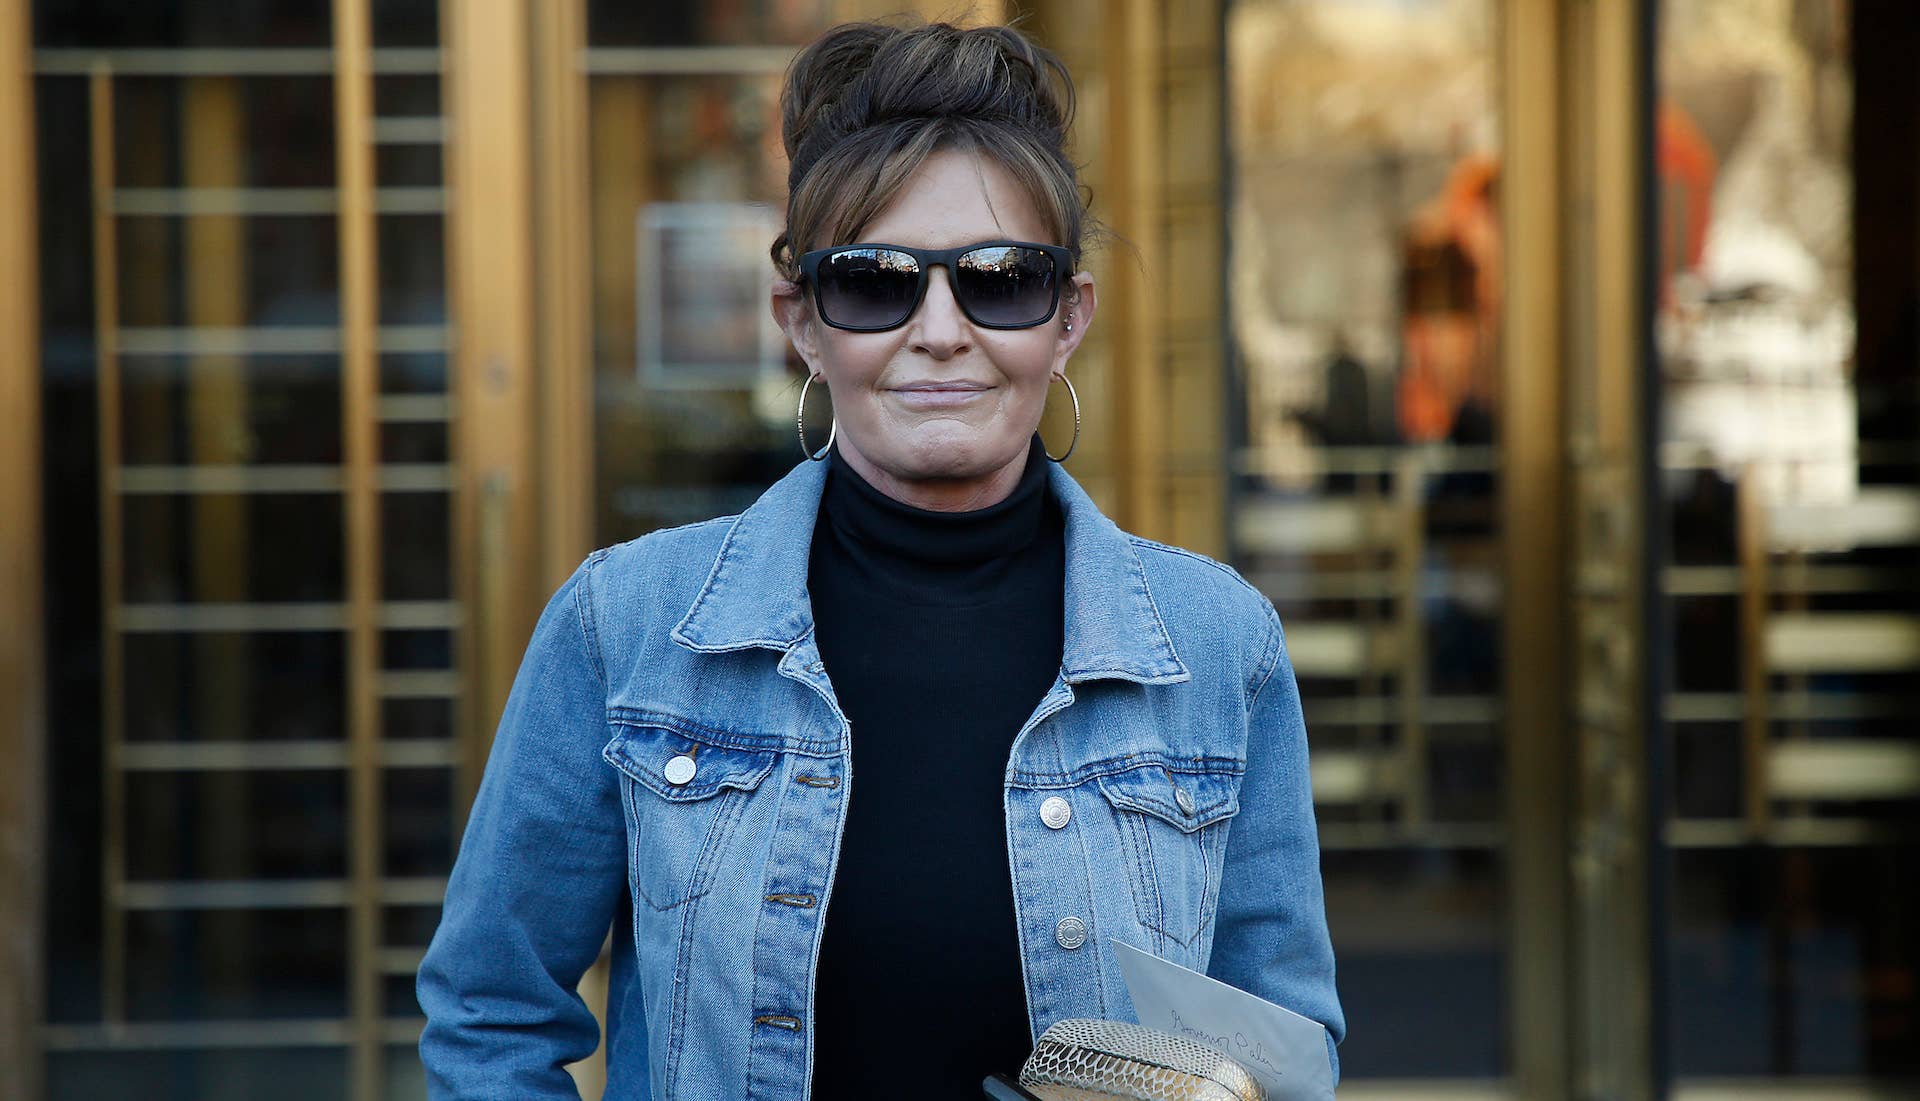 Sarah Palin leaving court in New York City